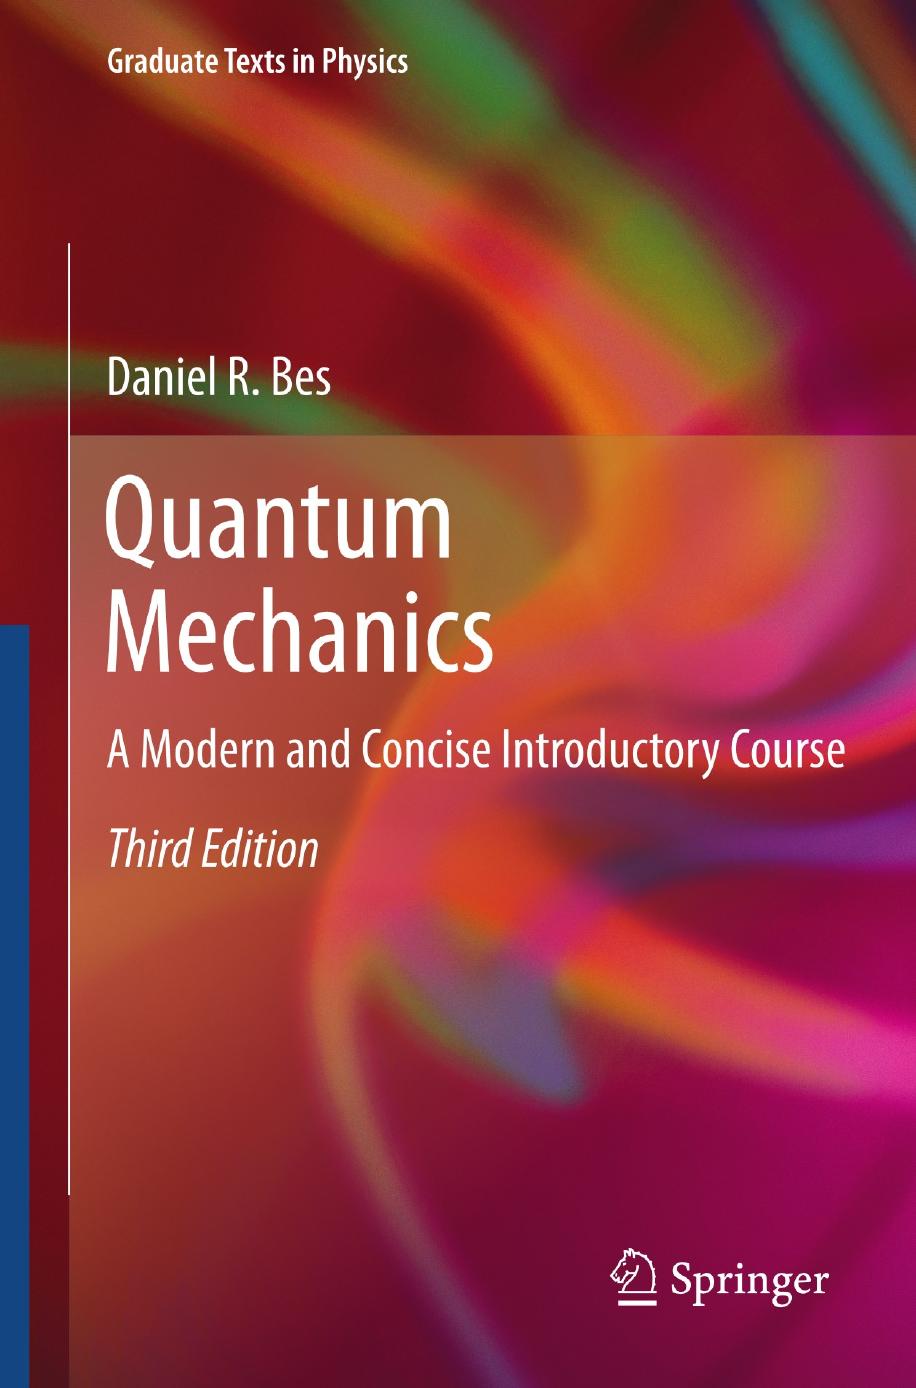 Quantum Mechanics A Modern and Concise Introductory Course 2004 ( PDFDrive.com )